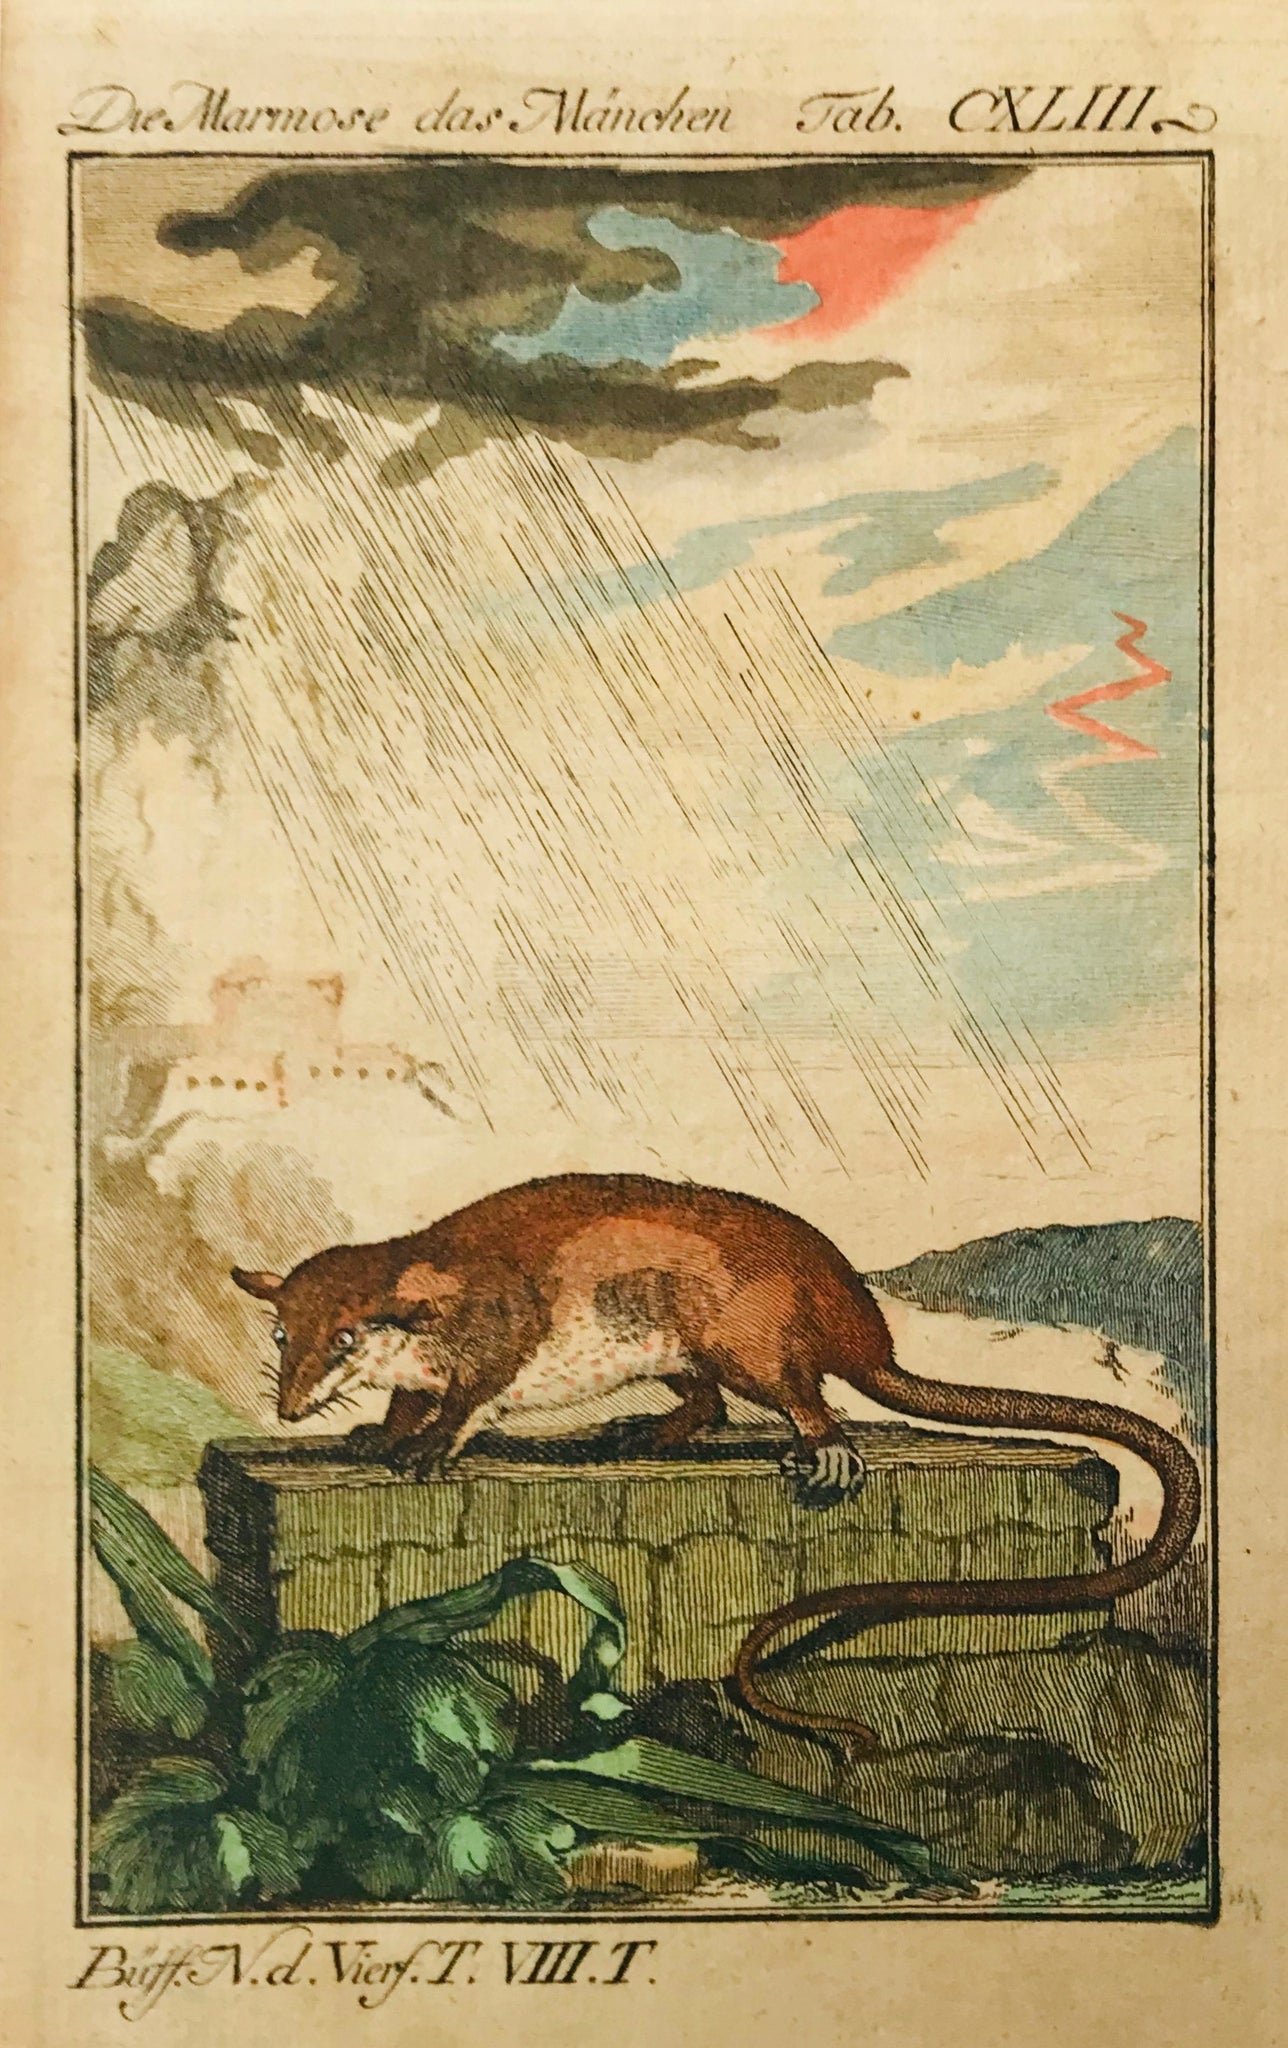 Der Marmose das Maenchen  Notice the dramatic sky showing a lightning and thunderstorm!  Copper engraving ca 1780. Original hand coloring.